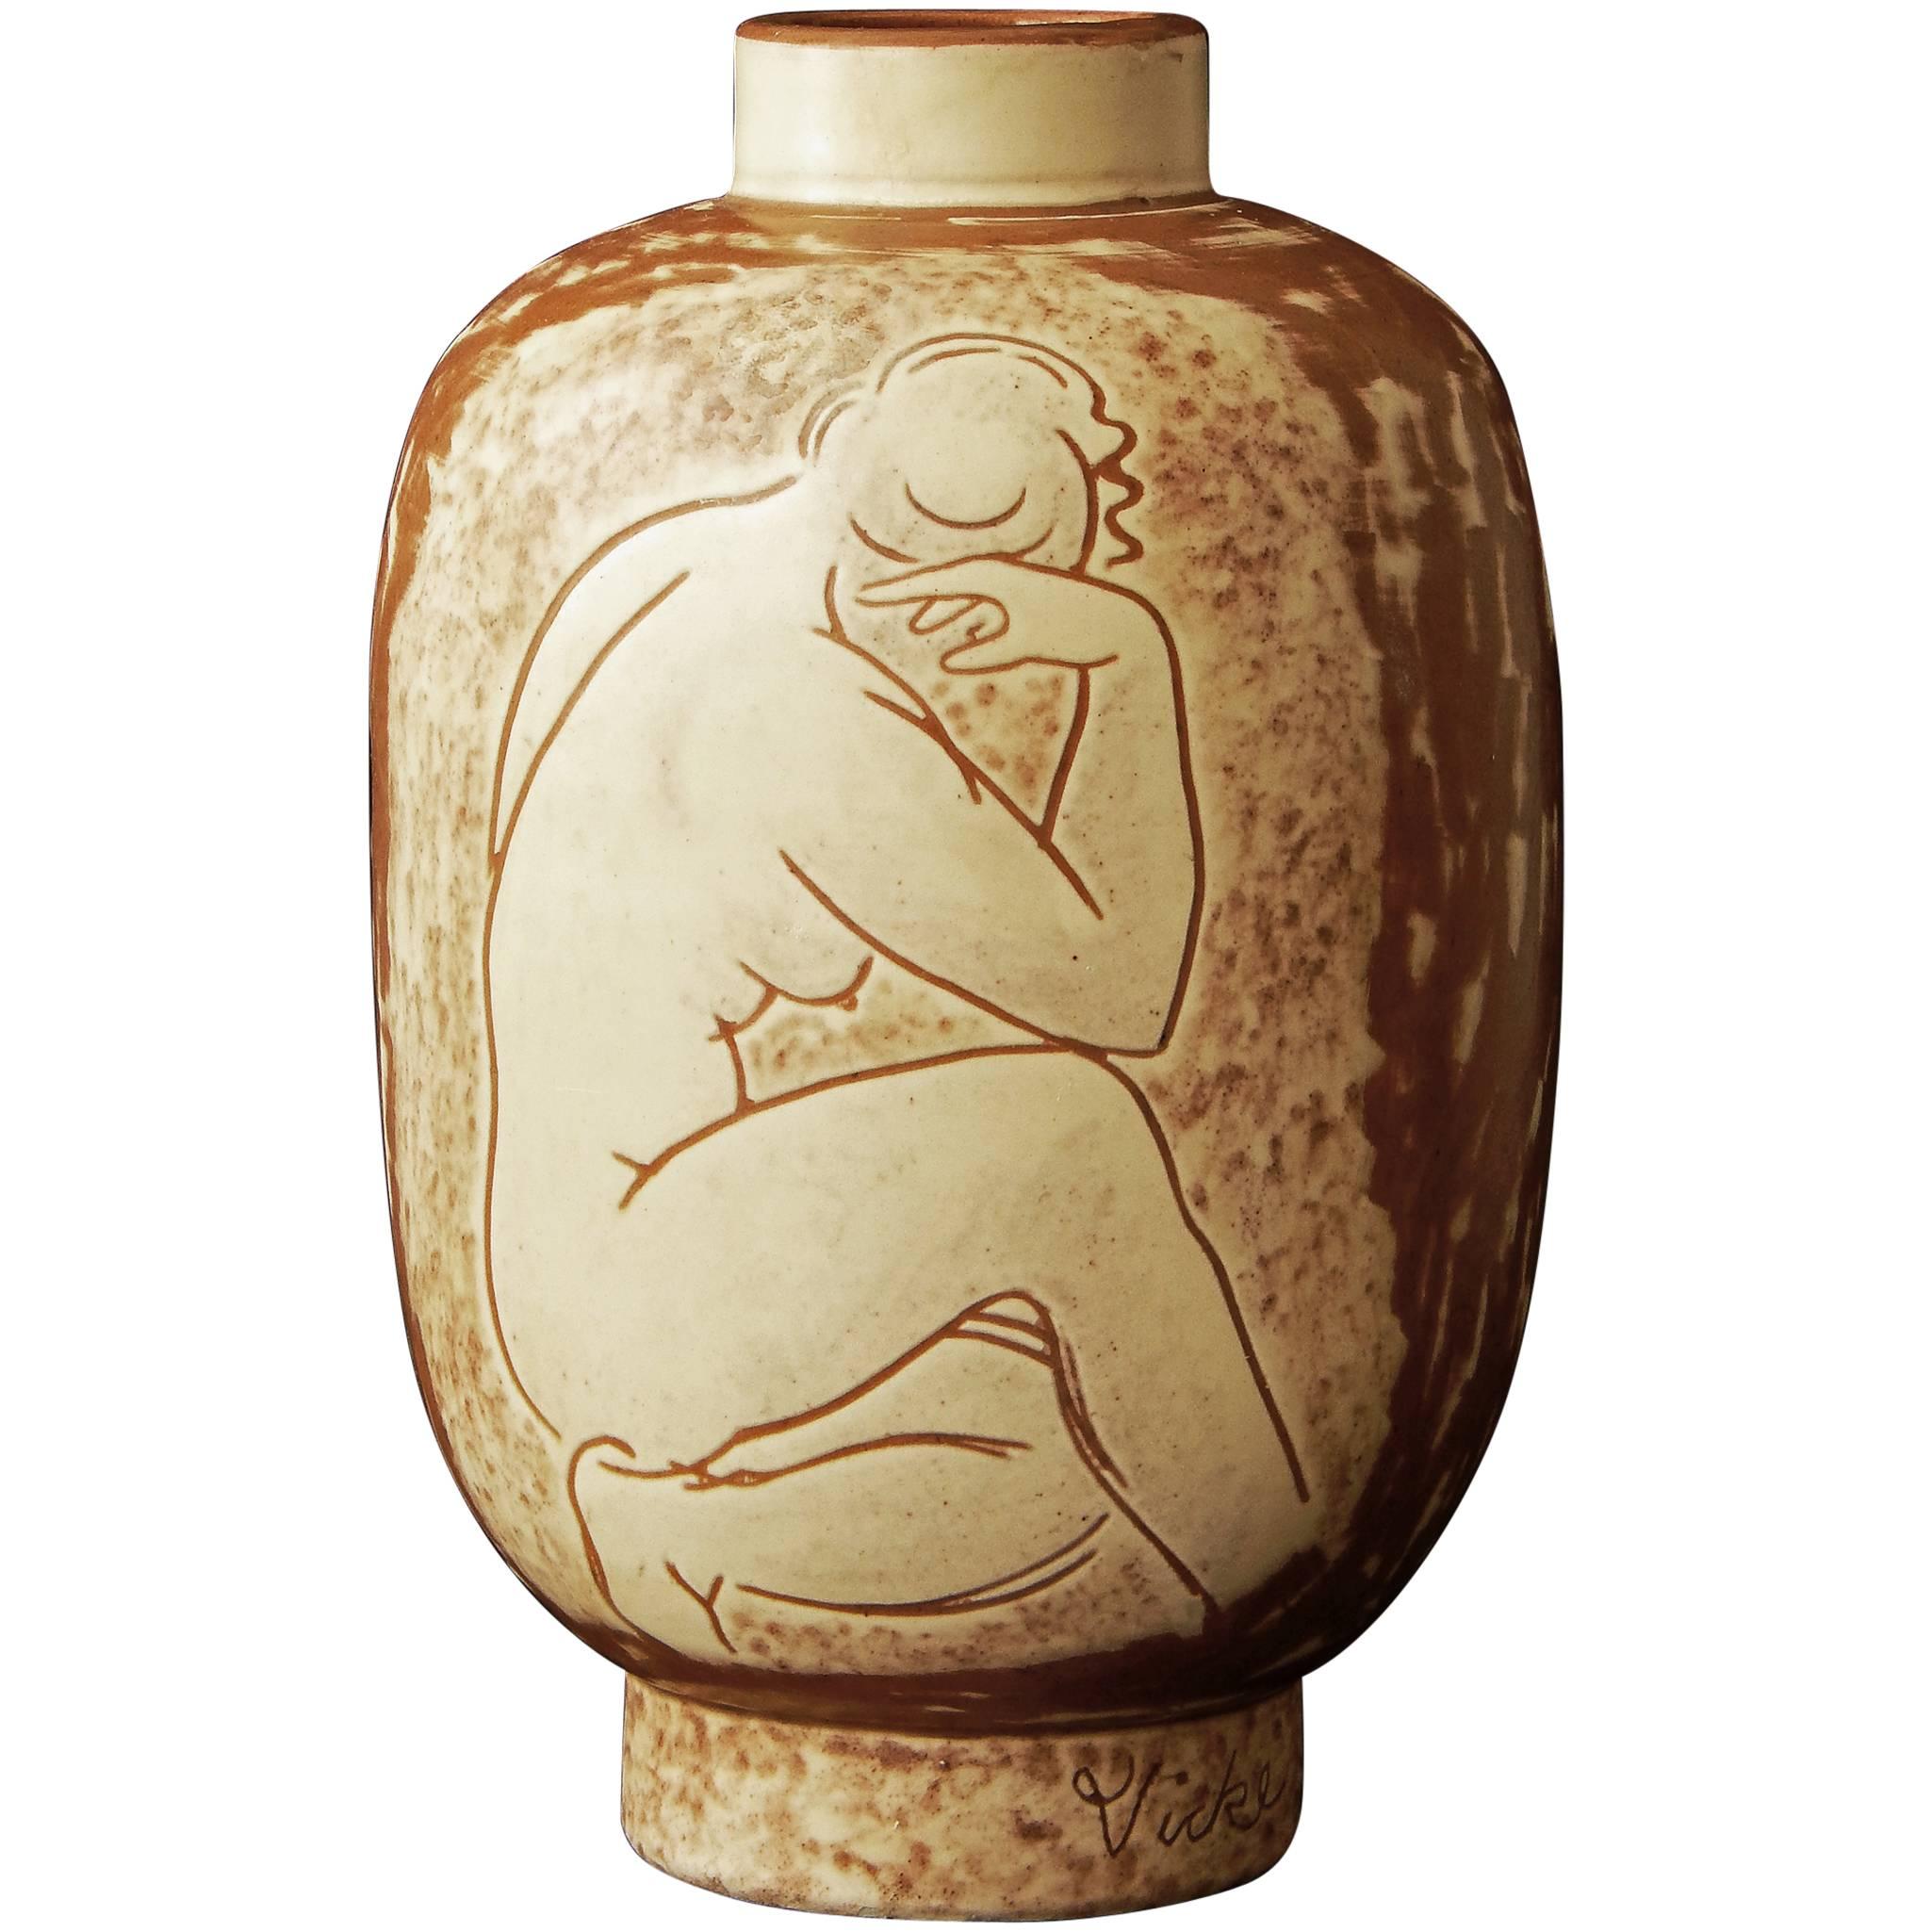 "Seated Nude, " Rare Art Deco Vase by Vicke Linstrand, 1940s